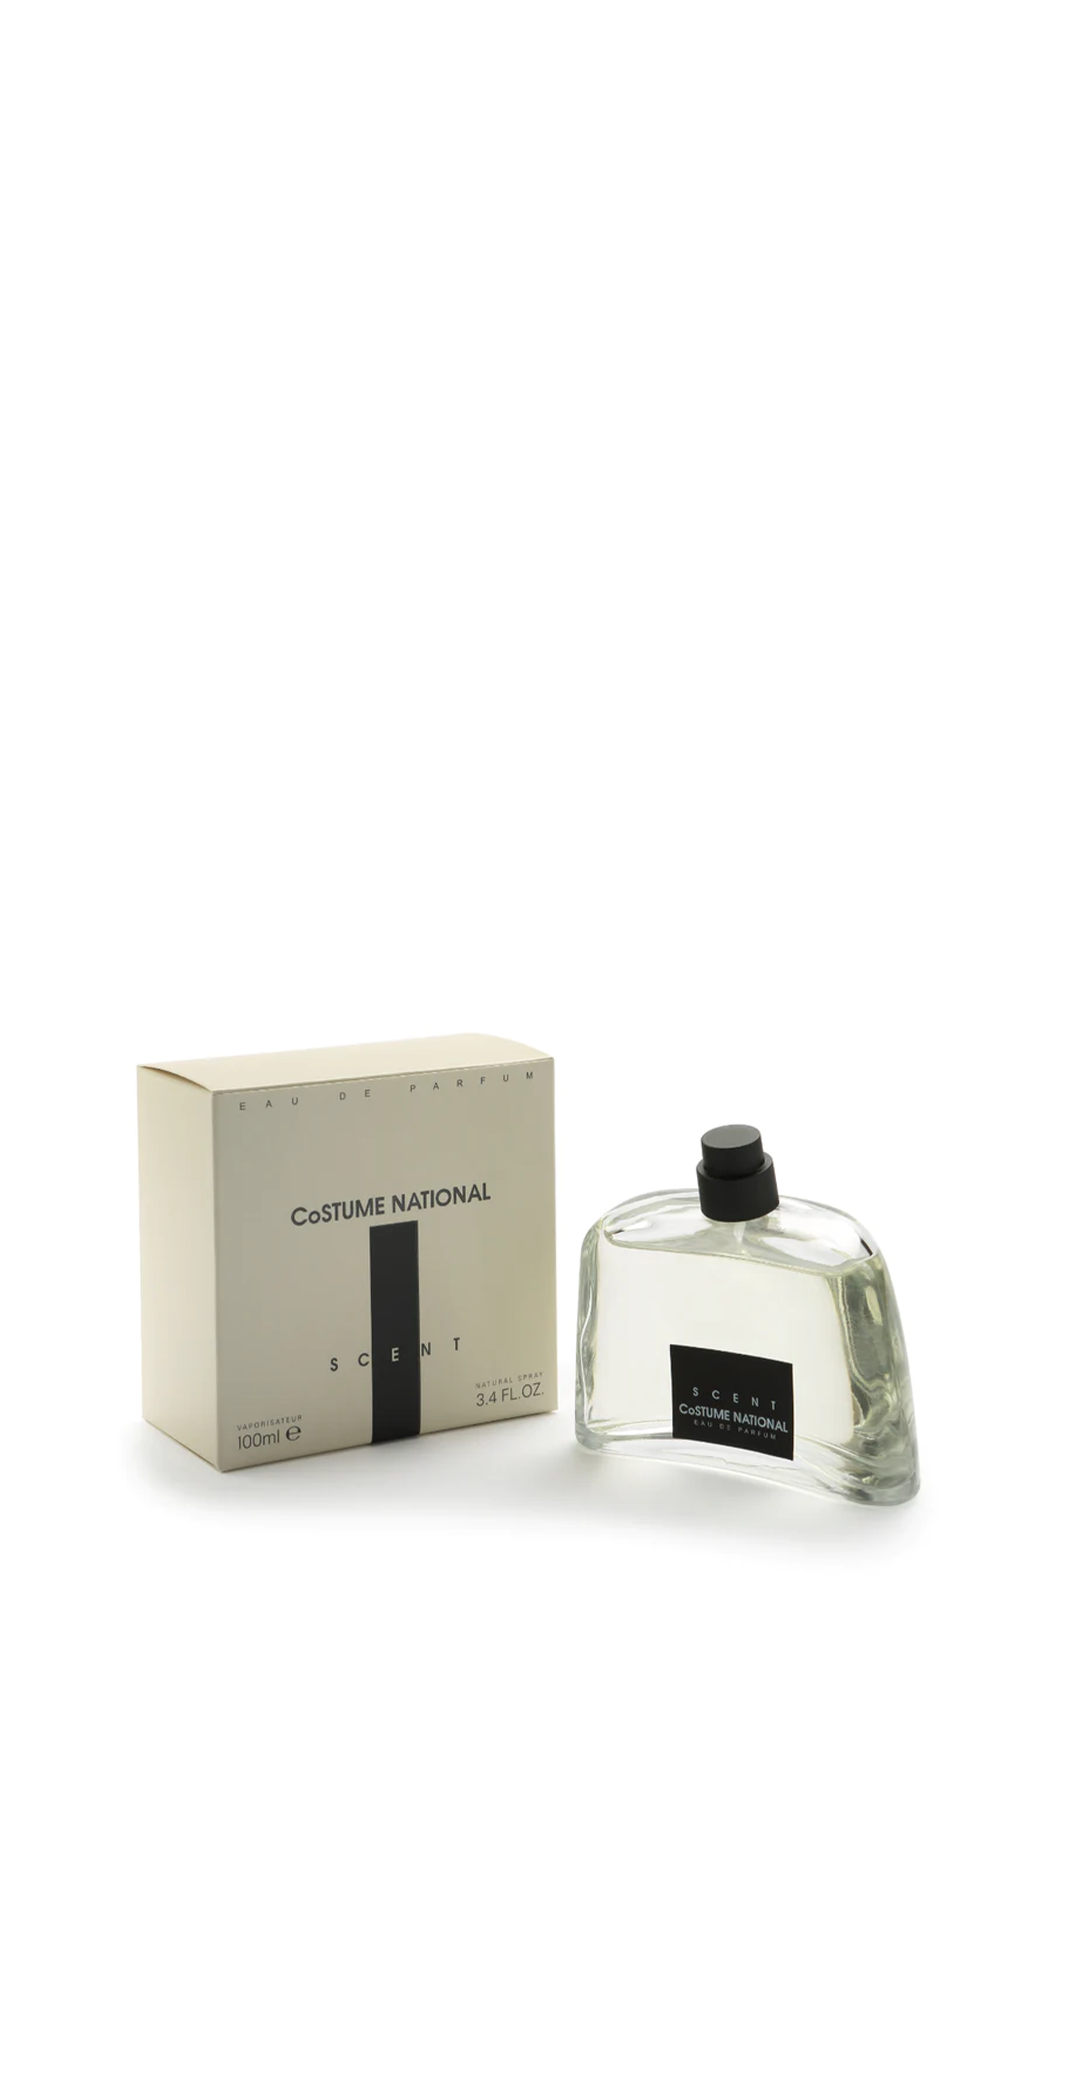 COSTUME NATIONAL Scent